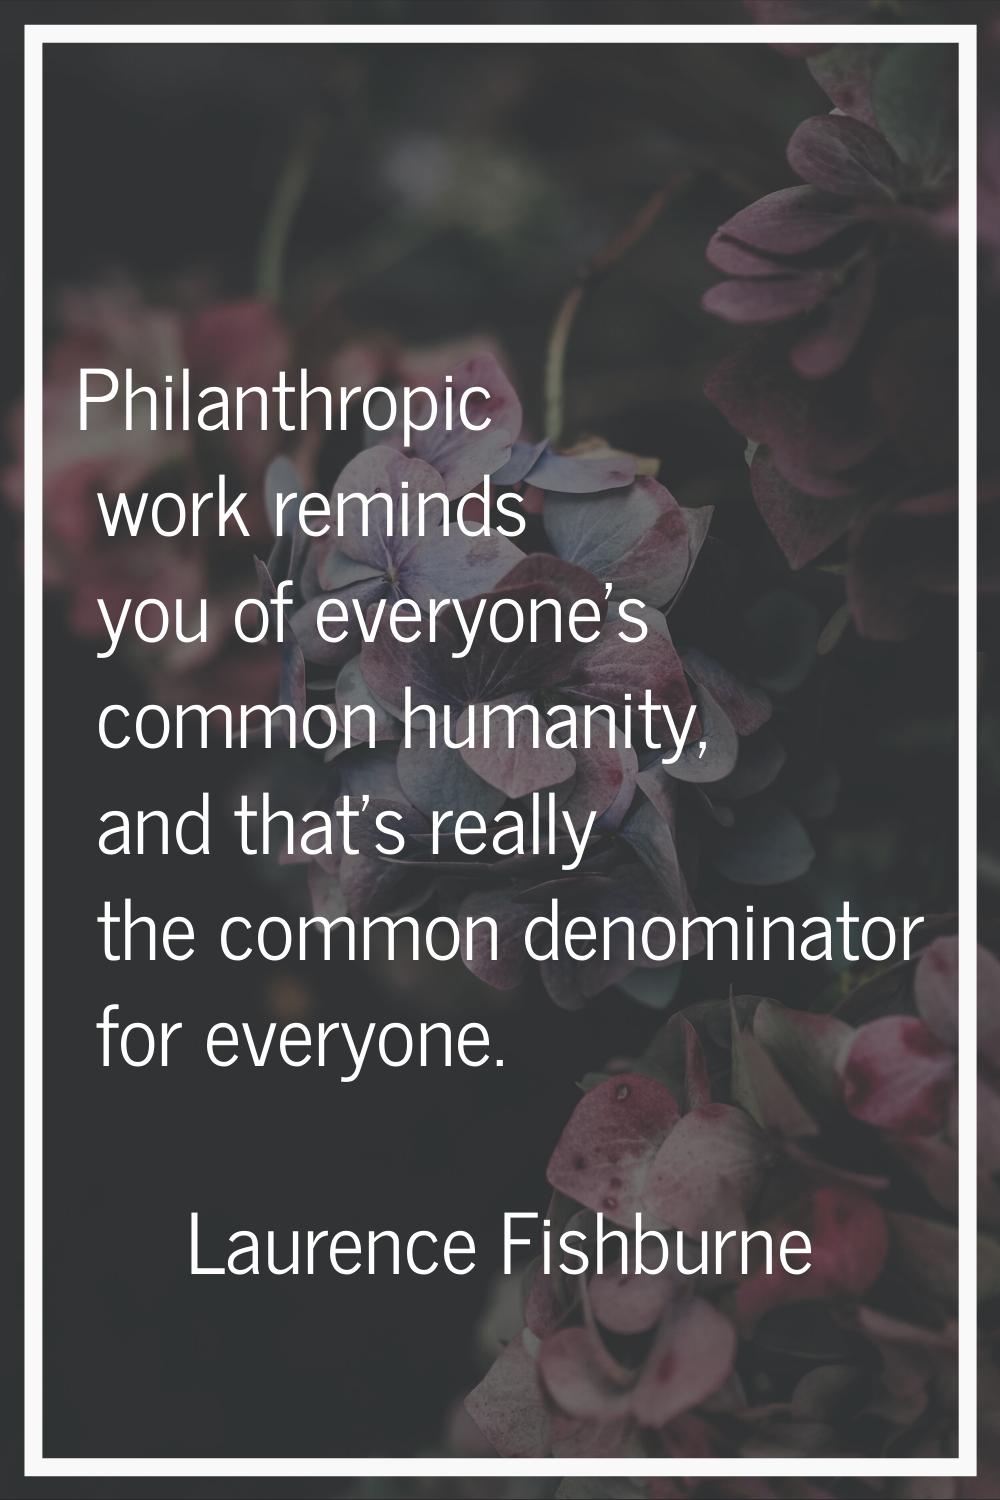 Philanthropic work reminds you of everyone's common humanity, and that's really the common denomina